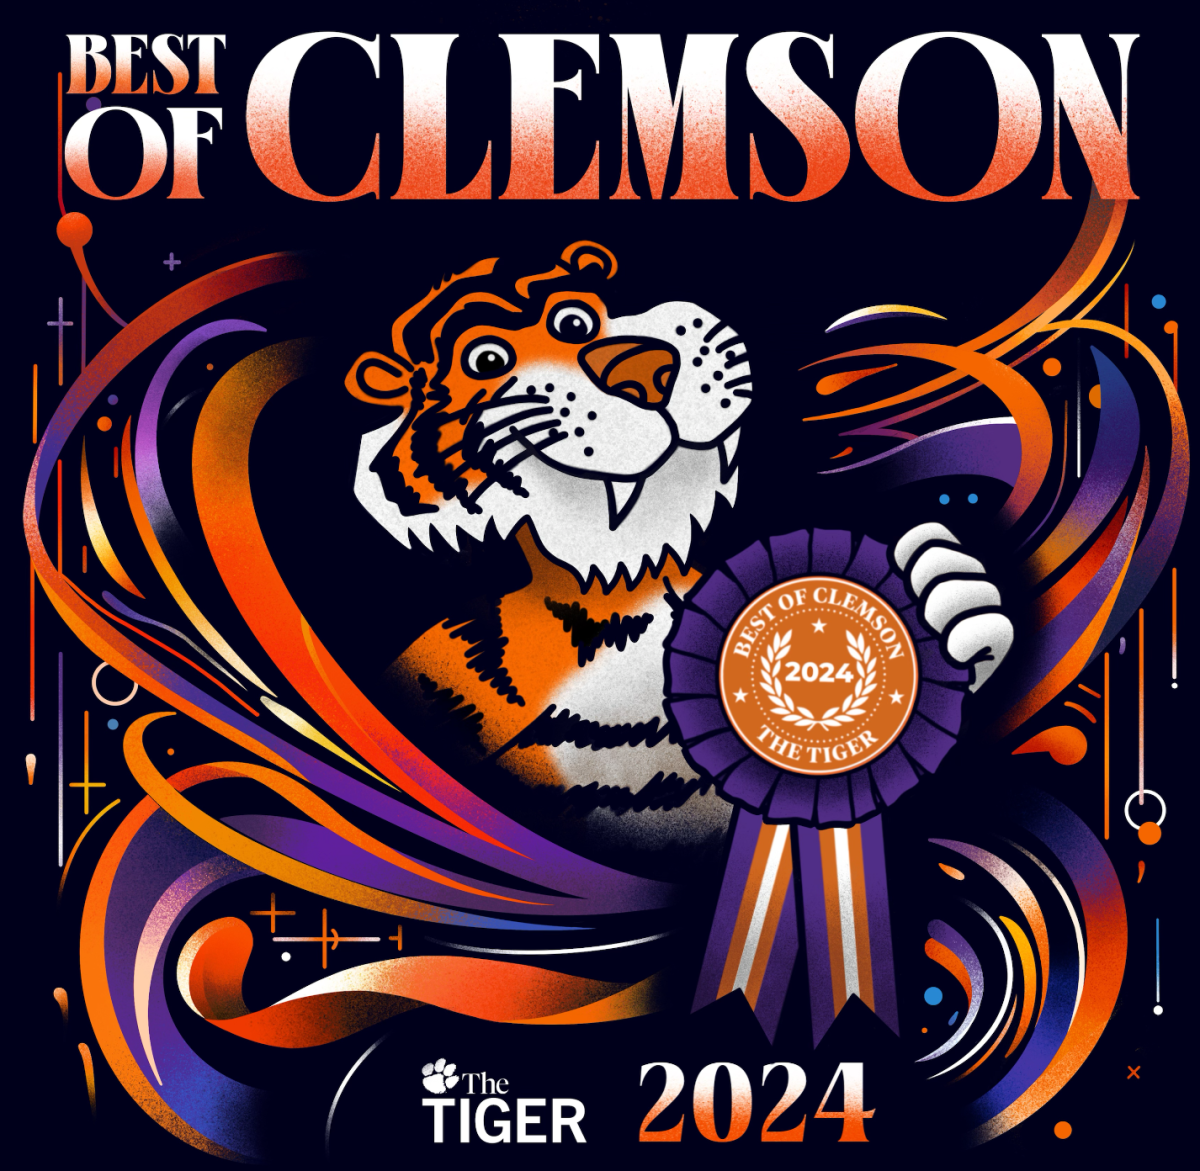 The Best of Clemson edition brings the Clemson community together together like no other.